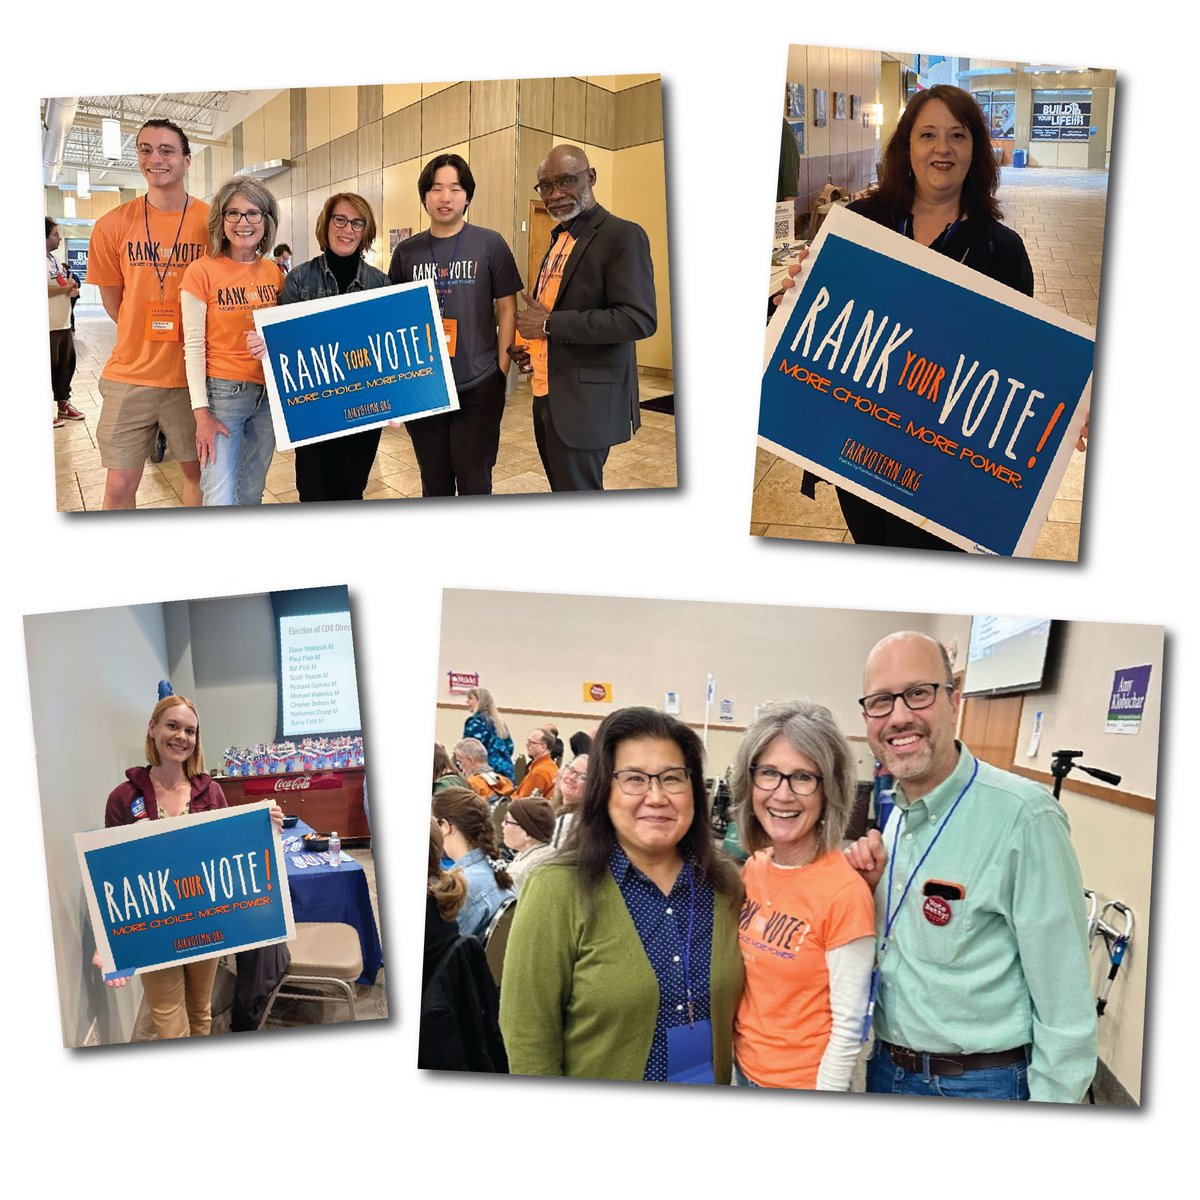 It was a busy weekend at congressional district conventions! We had a chance to thank some of our legislative champions as well as meet many supporters from around the state — and we can't wait to do it again next weekend! #mnleg